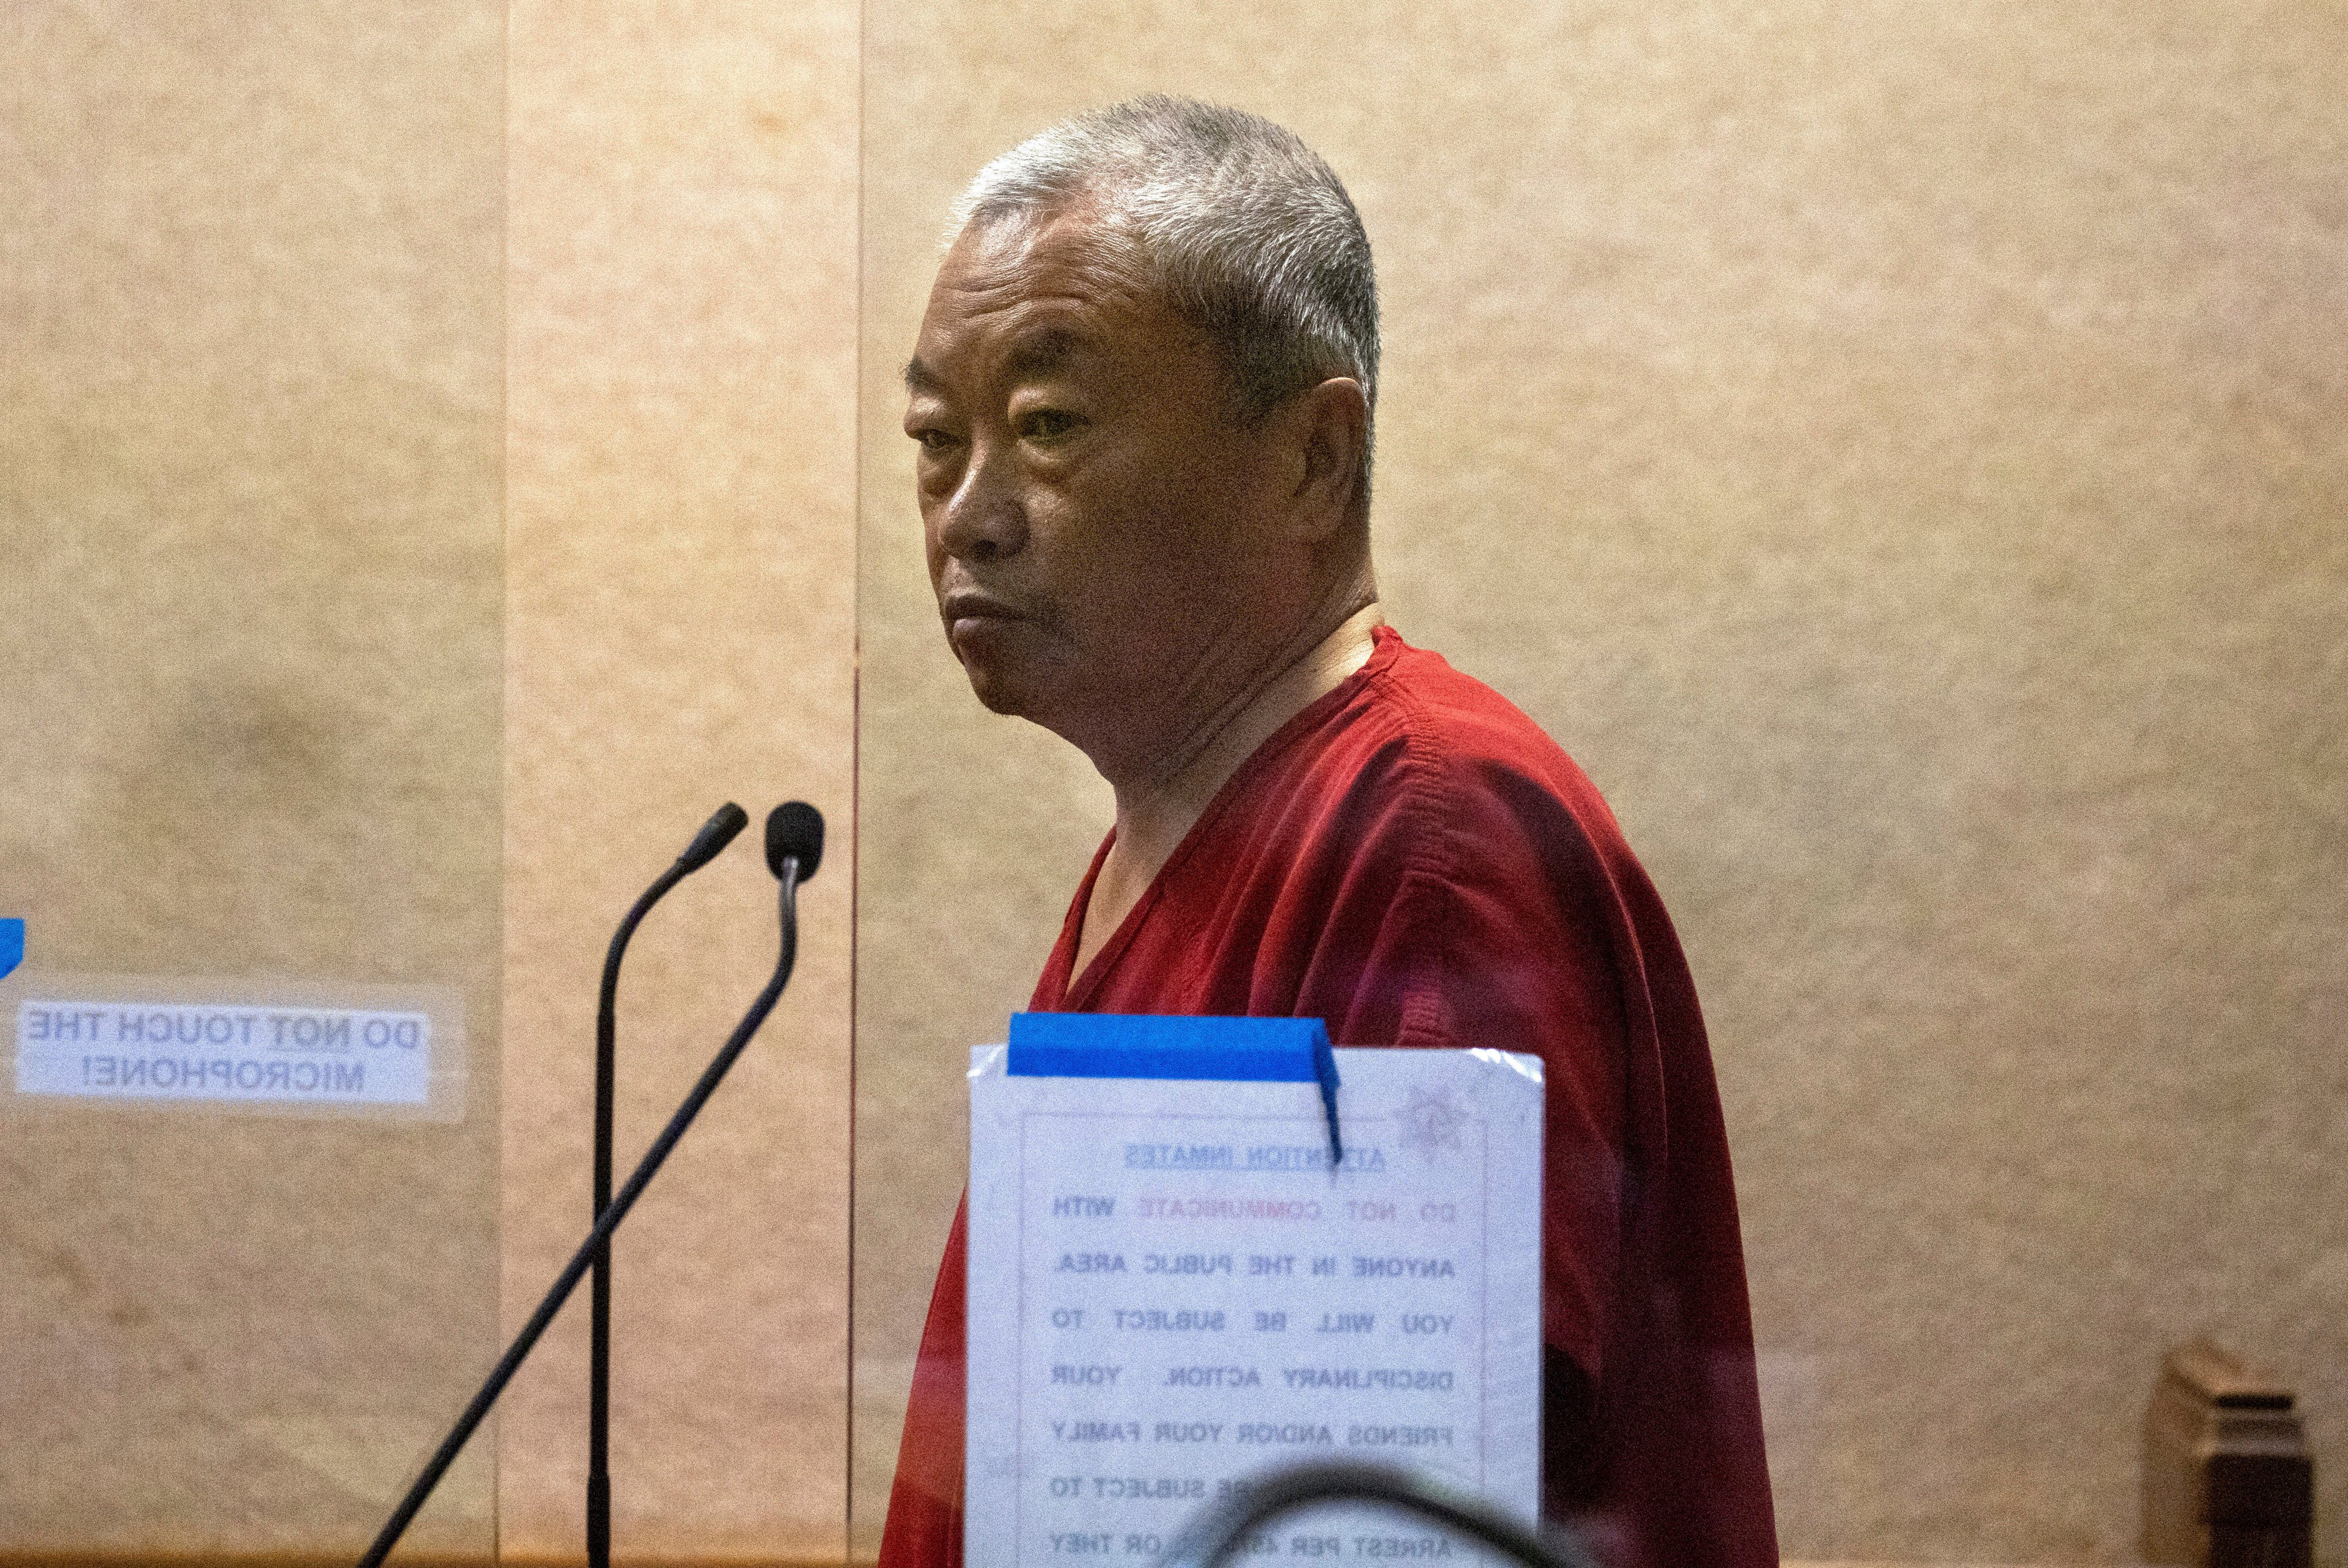 Chunli Zhao appears for his arraignment at San Mateo Superior Court in Redwood City, California, on Wednesday. Photo: AP